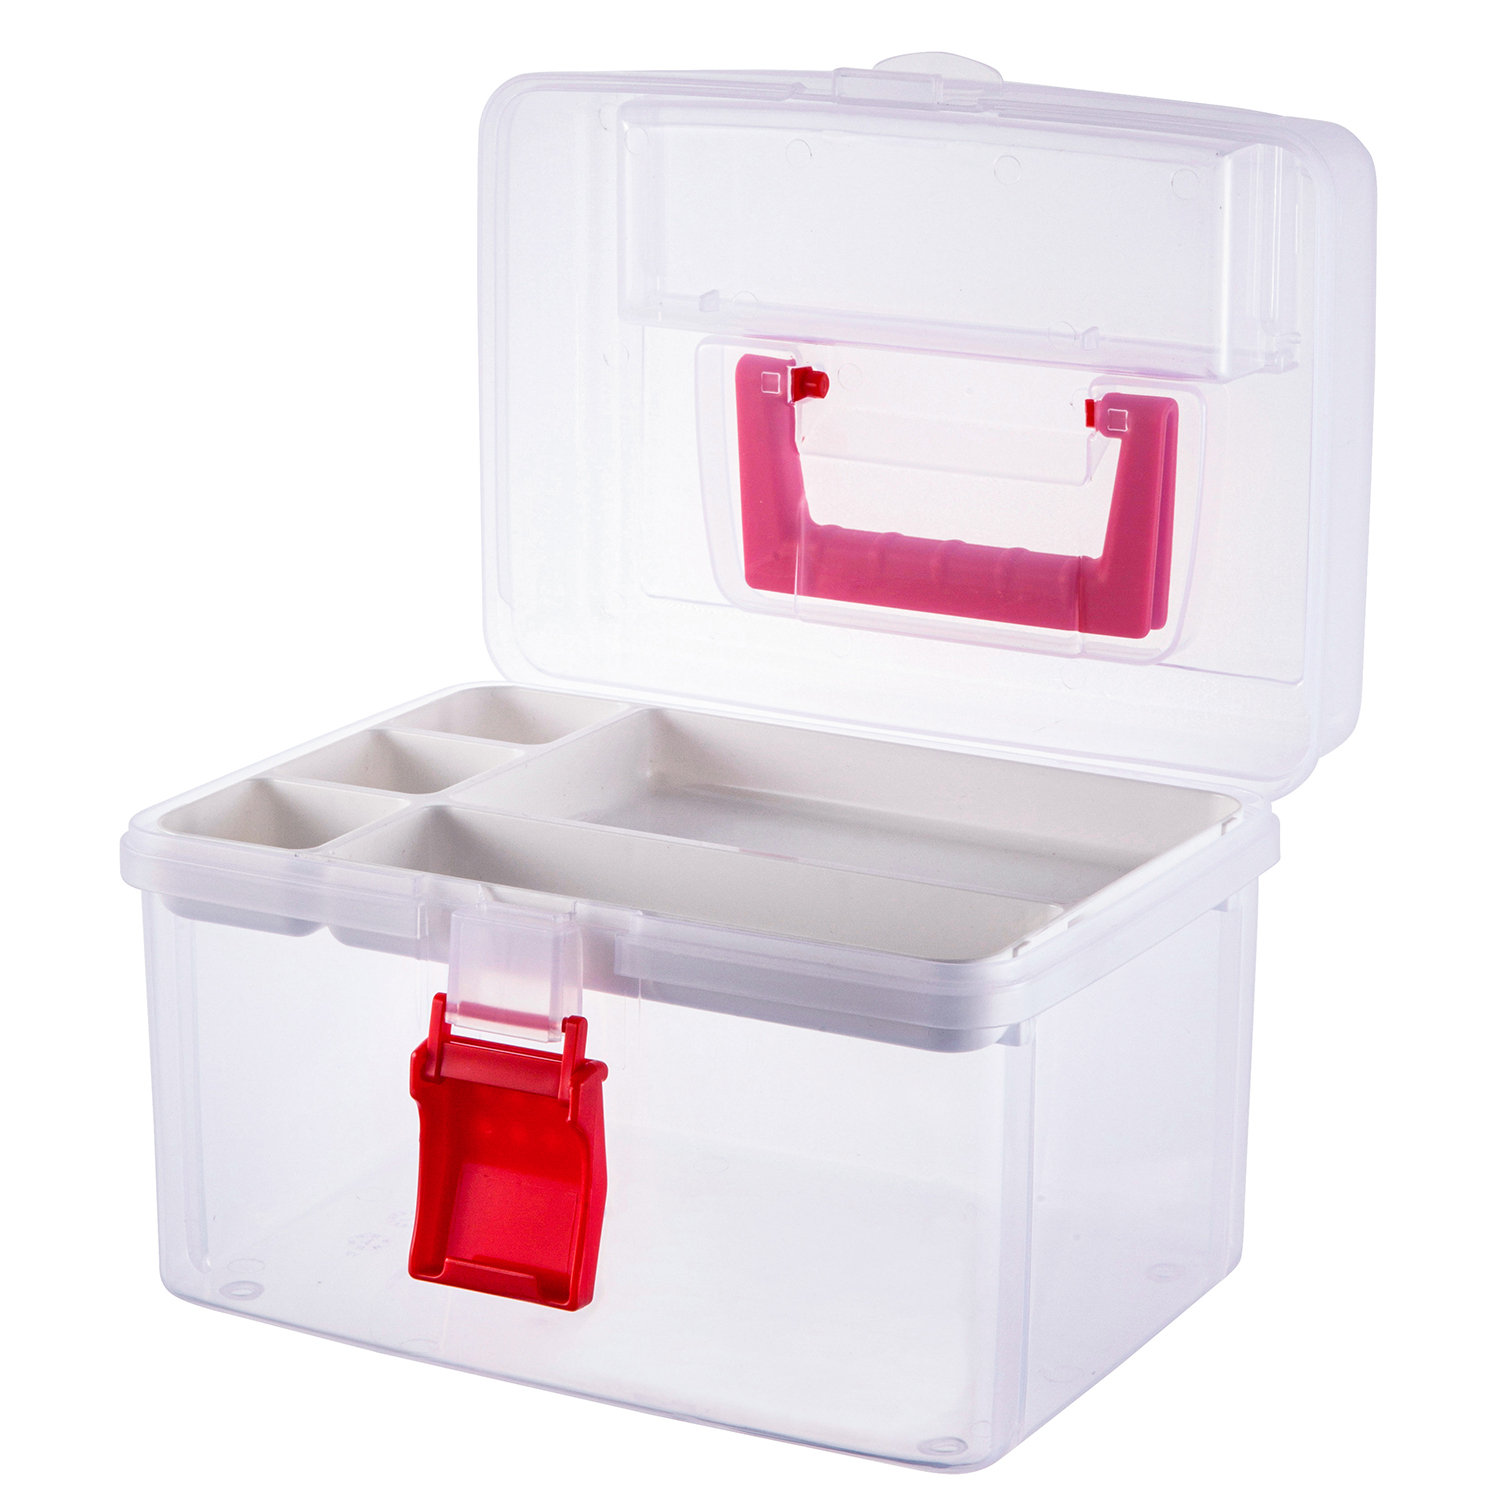 3-Layer Stackable Craft Storage Containers - Clear Plastic Craft Box Organizer with 30 Adjustable Compartments and Handle - Portable Beads Organizers